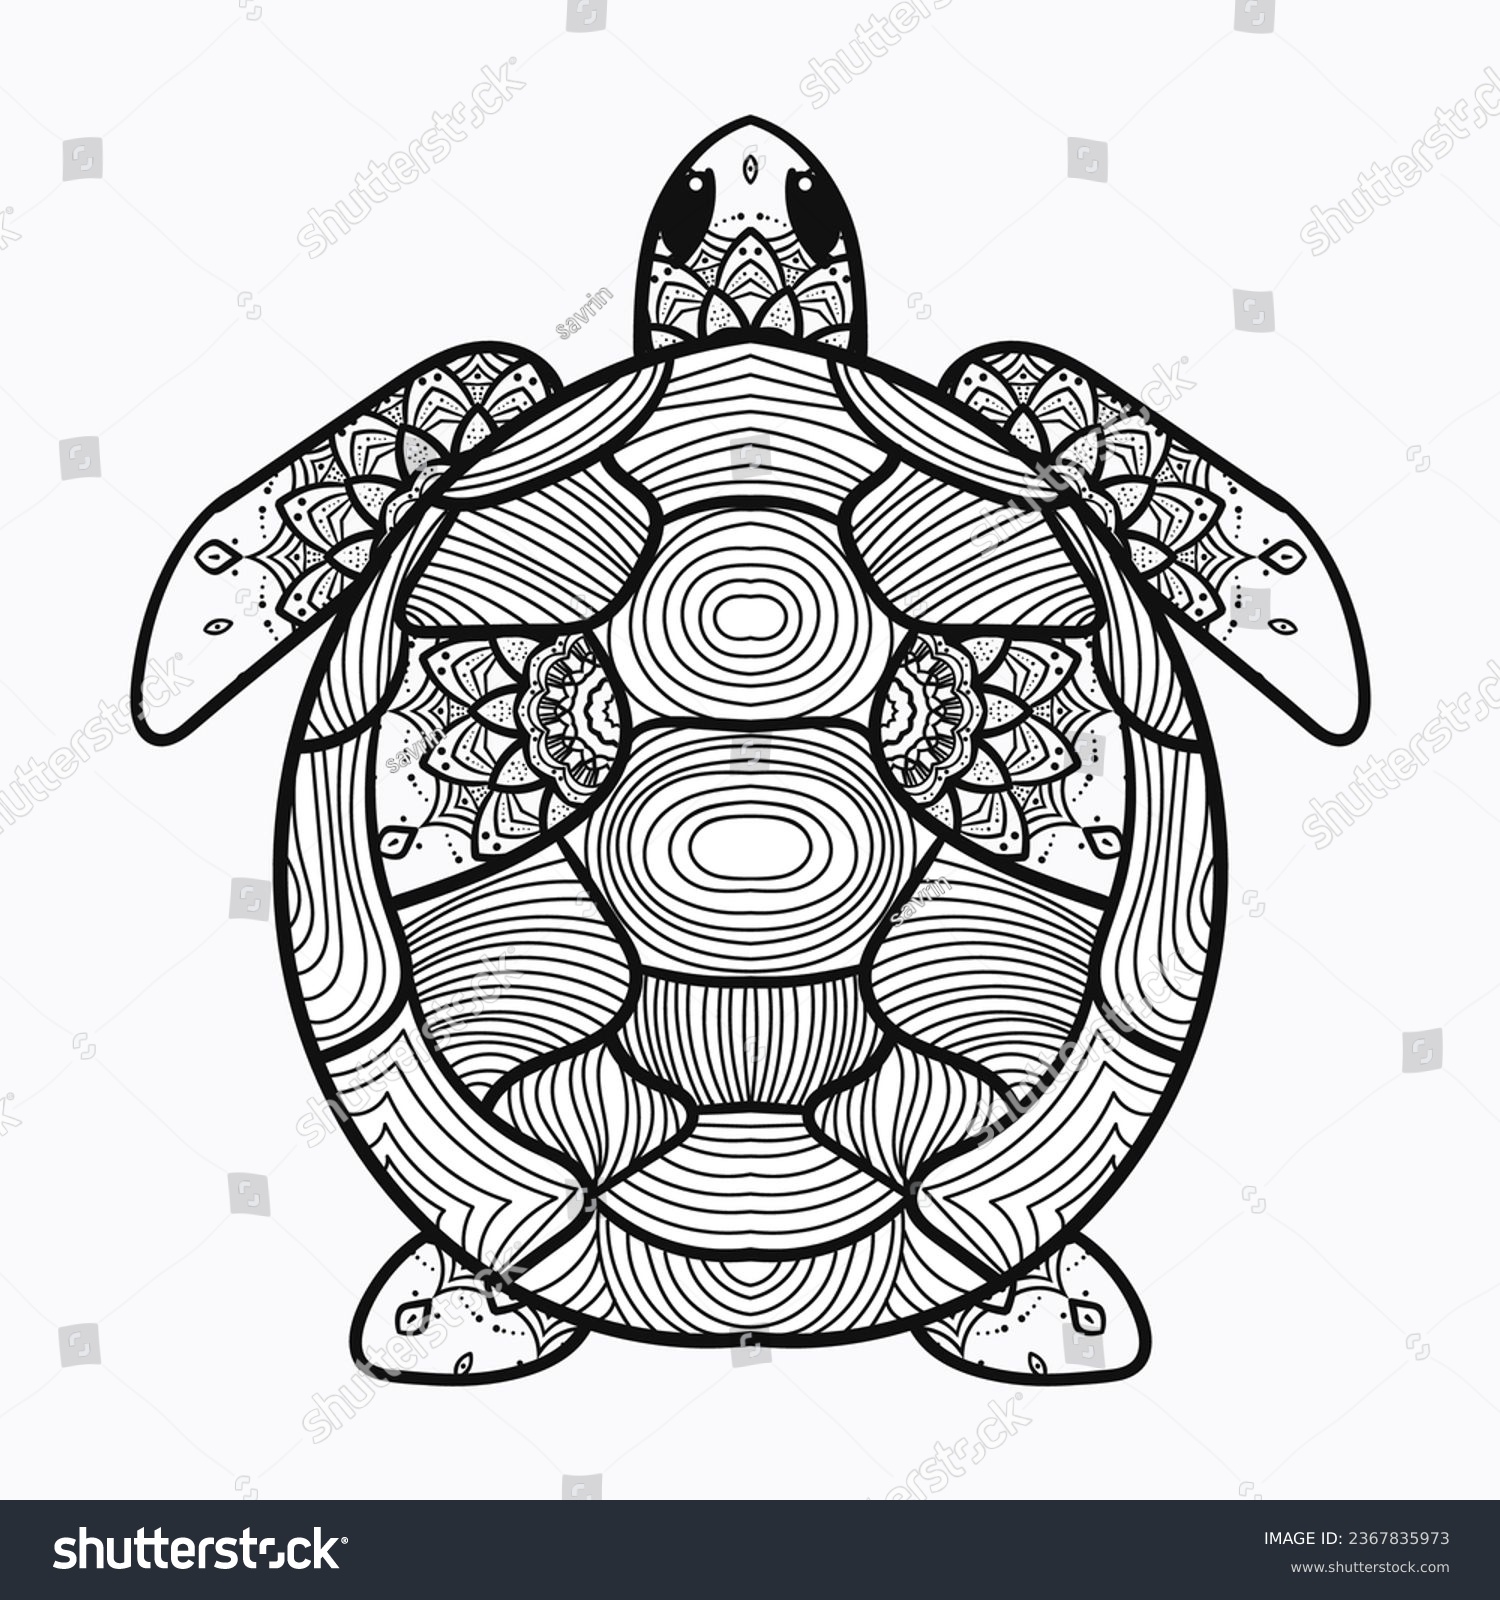 SVG of cute elegant graphic Mandala art Animal Illustration for Relaxation and Zen Art isolated for coloring book and coloring pages cartoon character outline vector illustration turtle tortoise svg